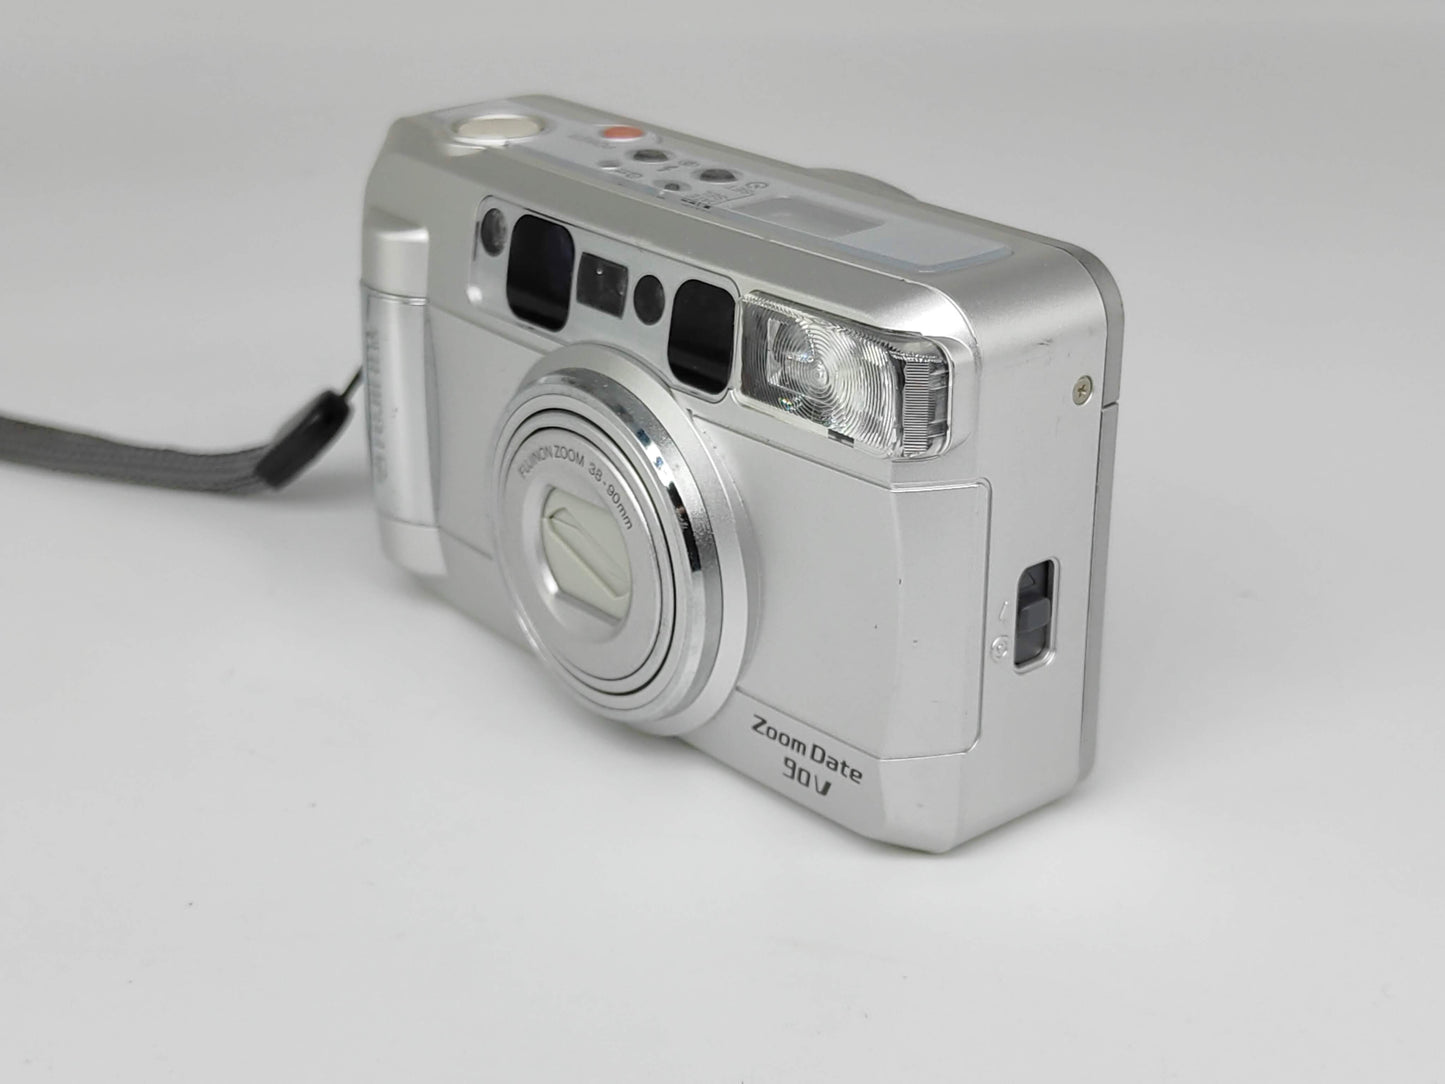 Fuji Zoom Date 90V point-and-shoot film camera